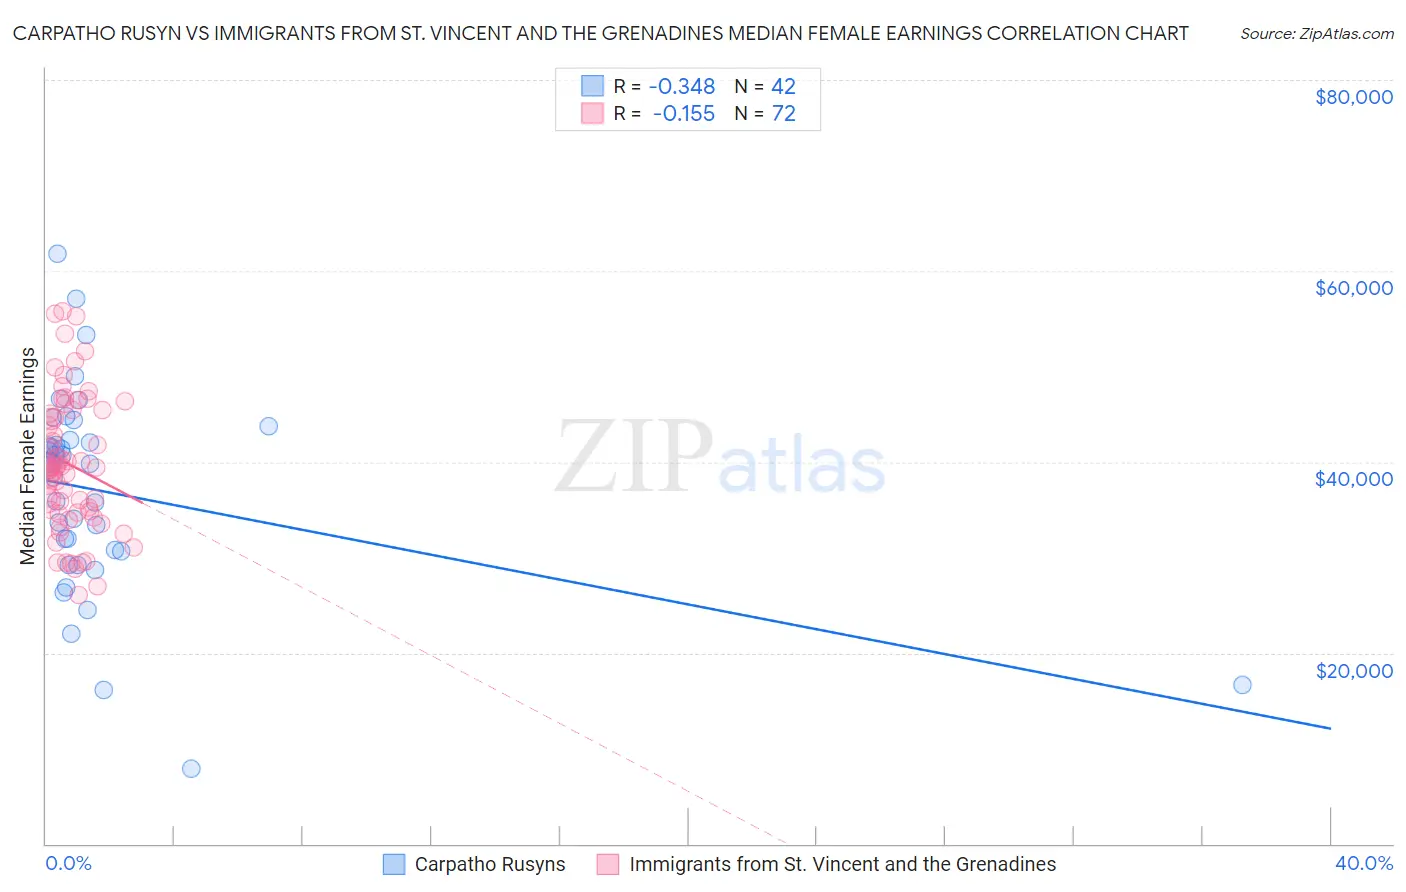 Carpatho Rusyn vs Immigrants from St. Vincent and the Grenadines Median Female Earnings